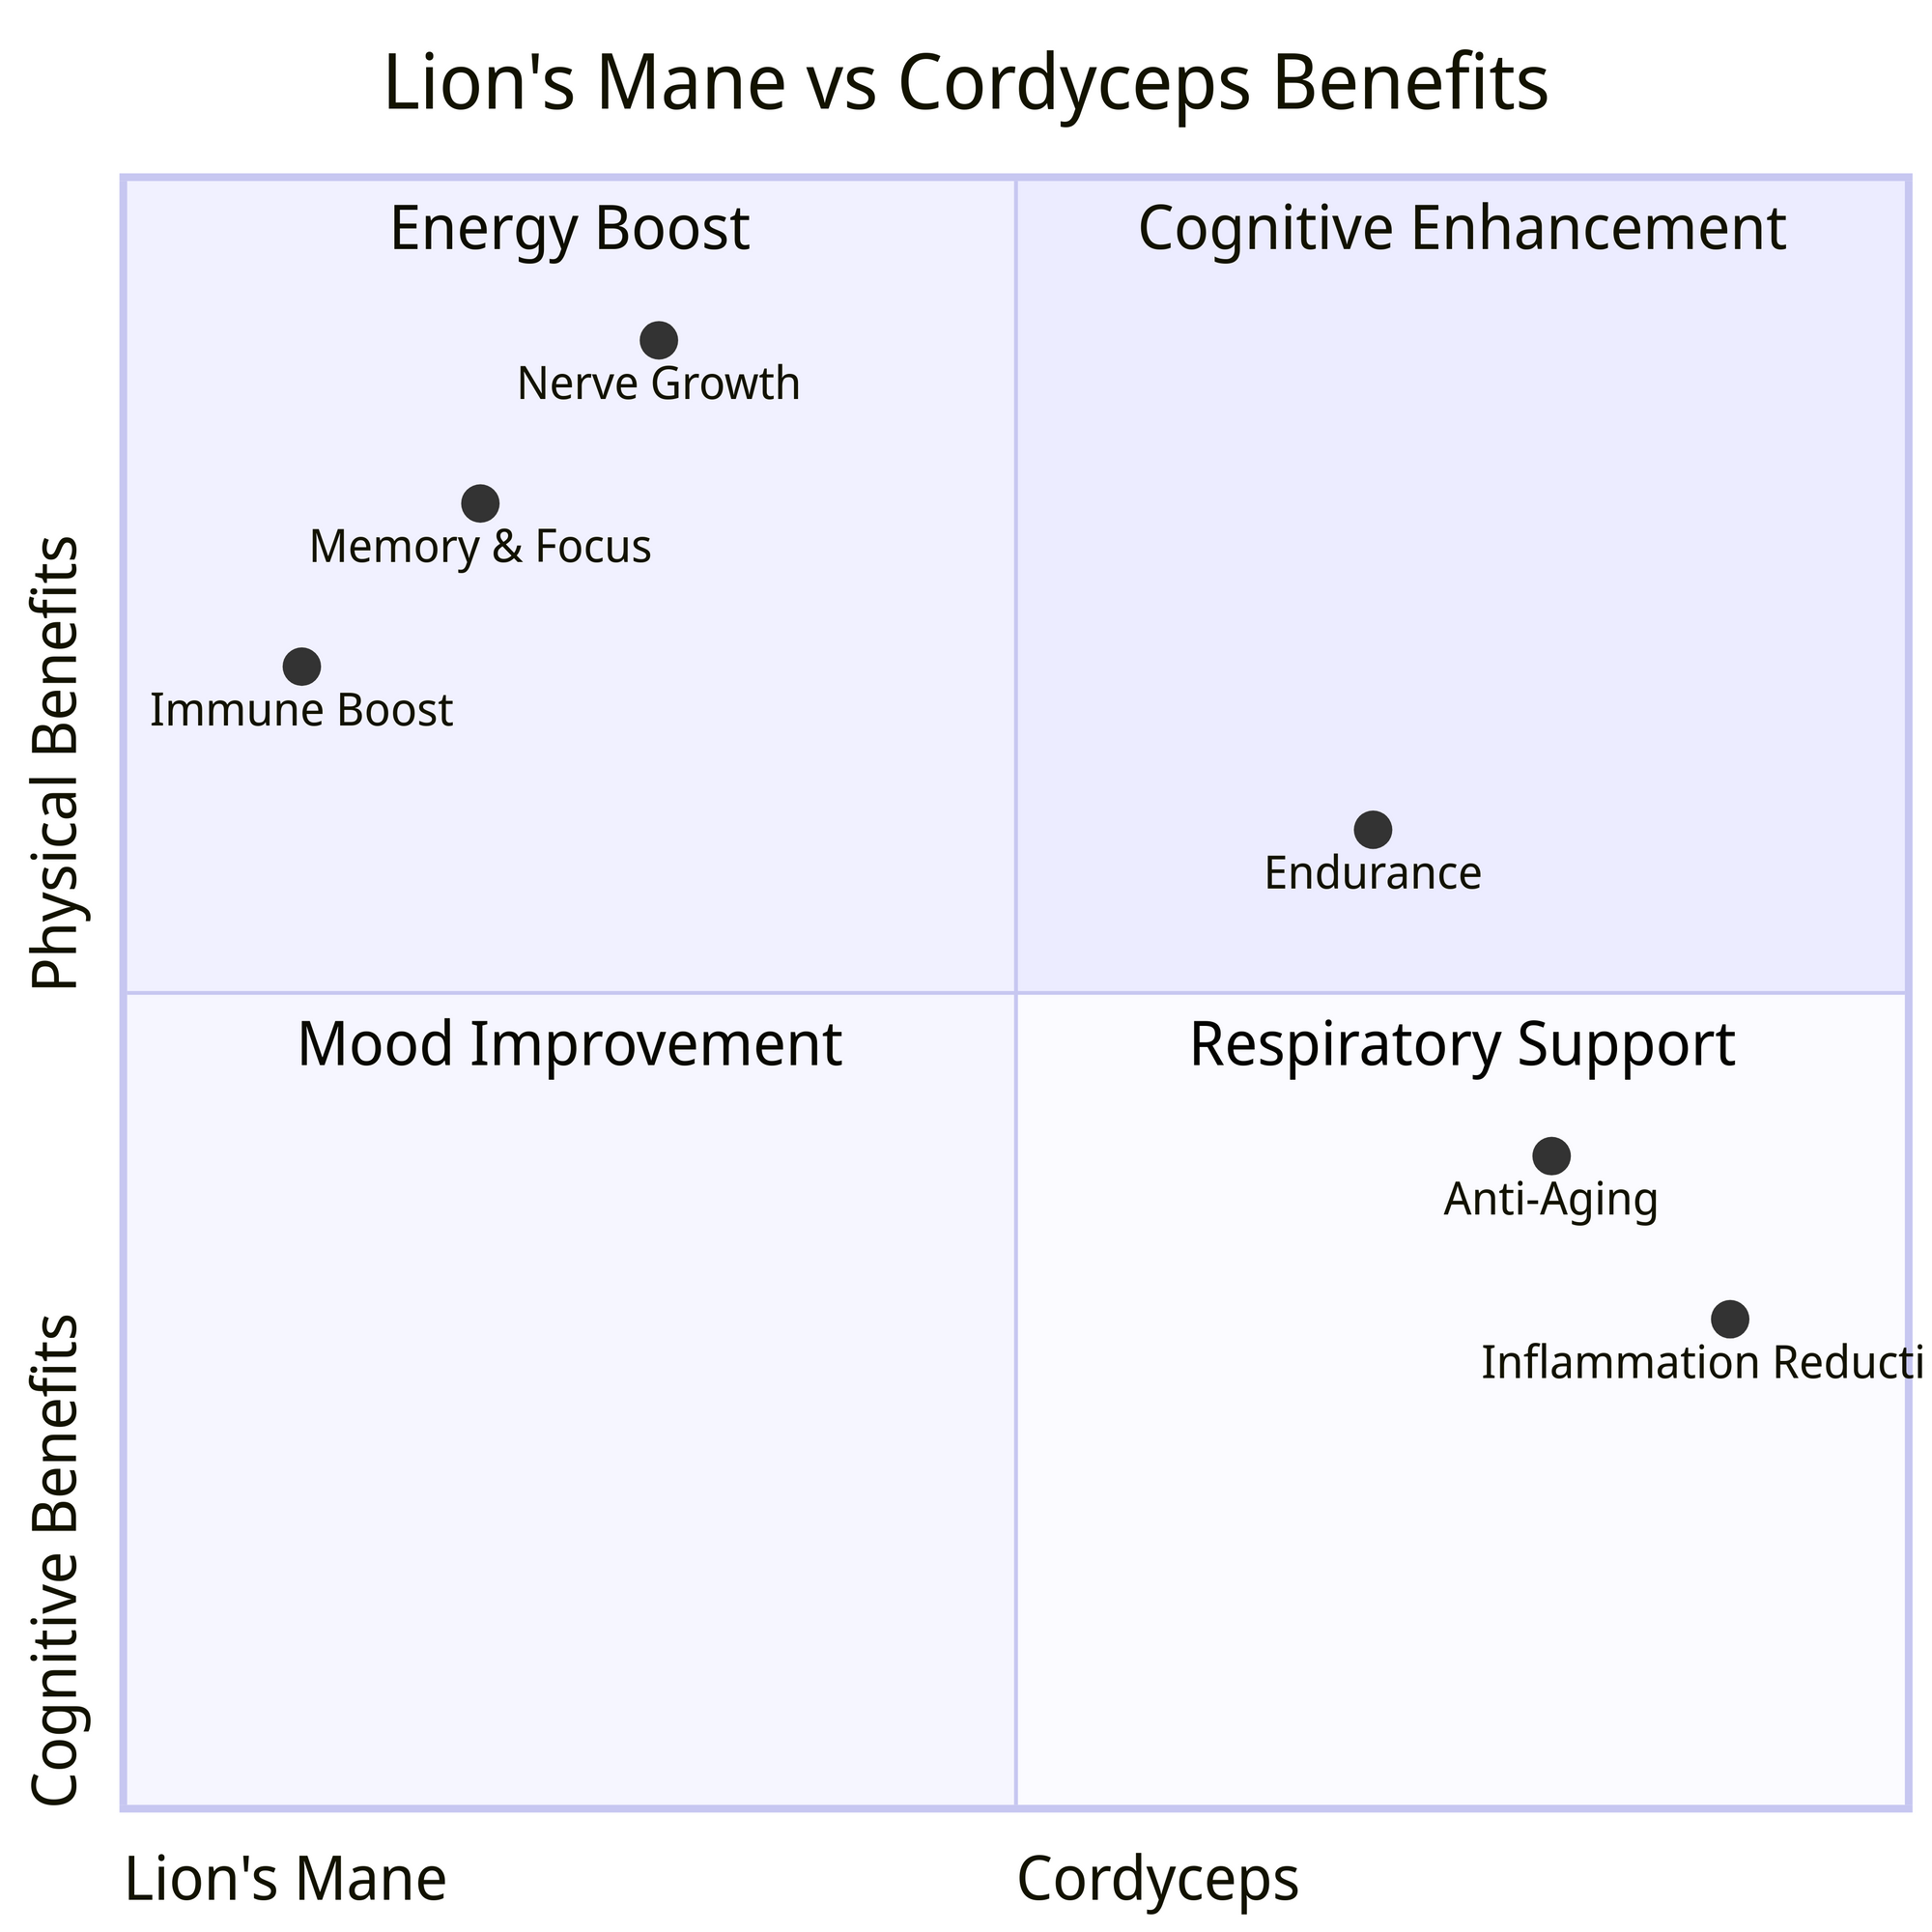 Shows the benefits of both Lions Mane and Cordyceps